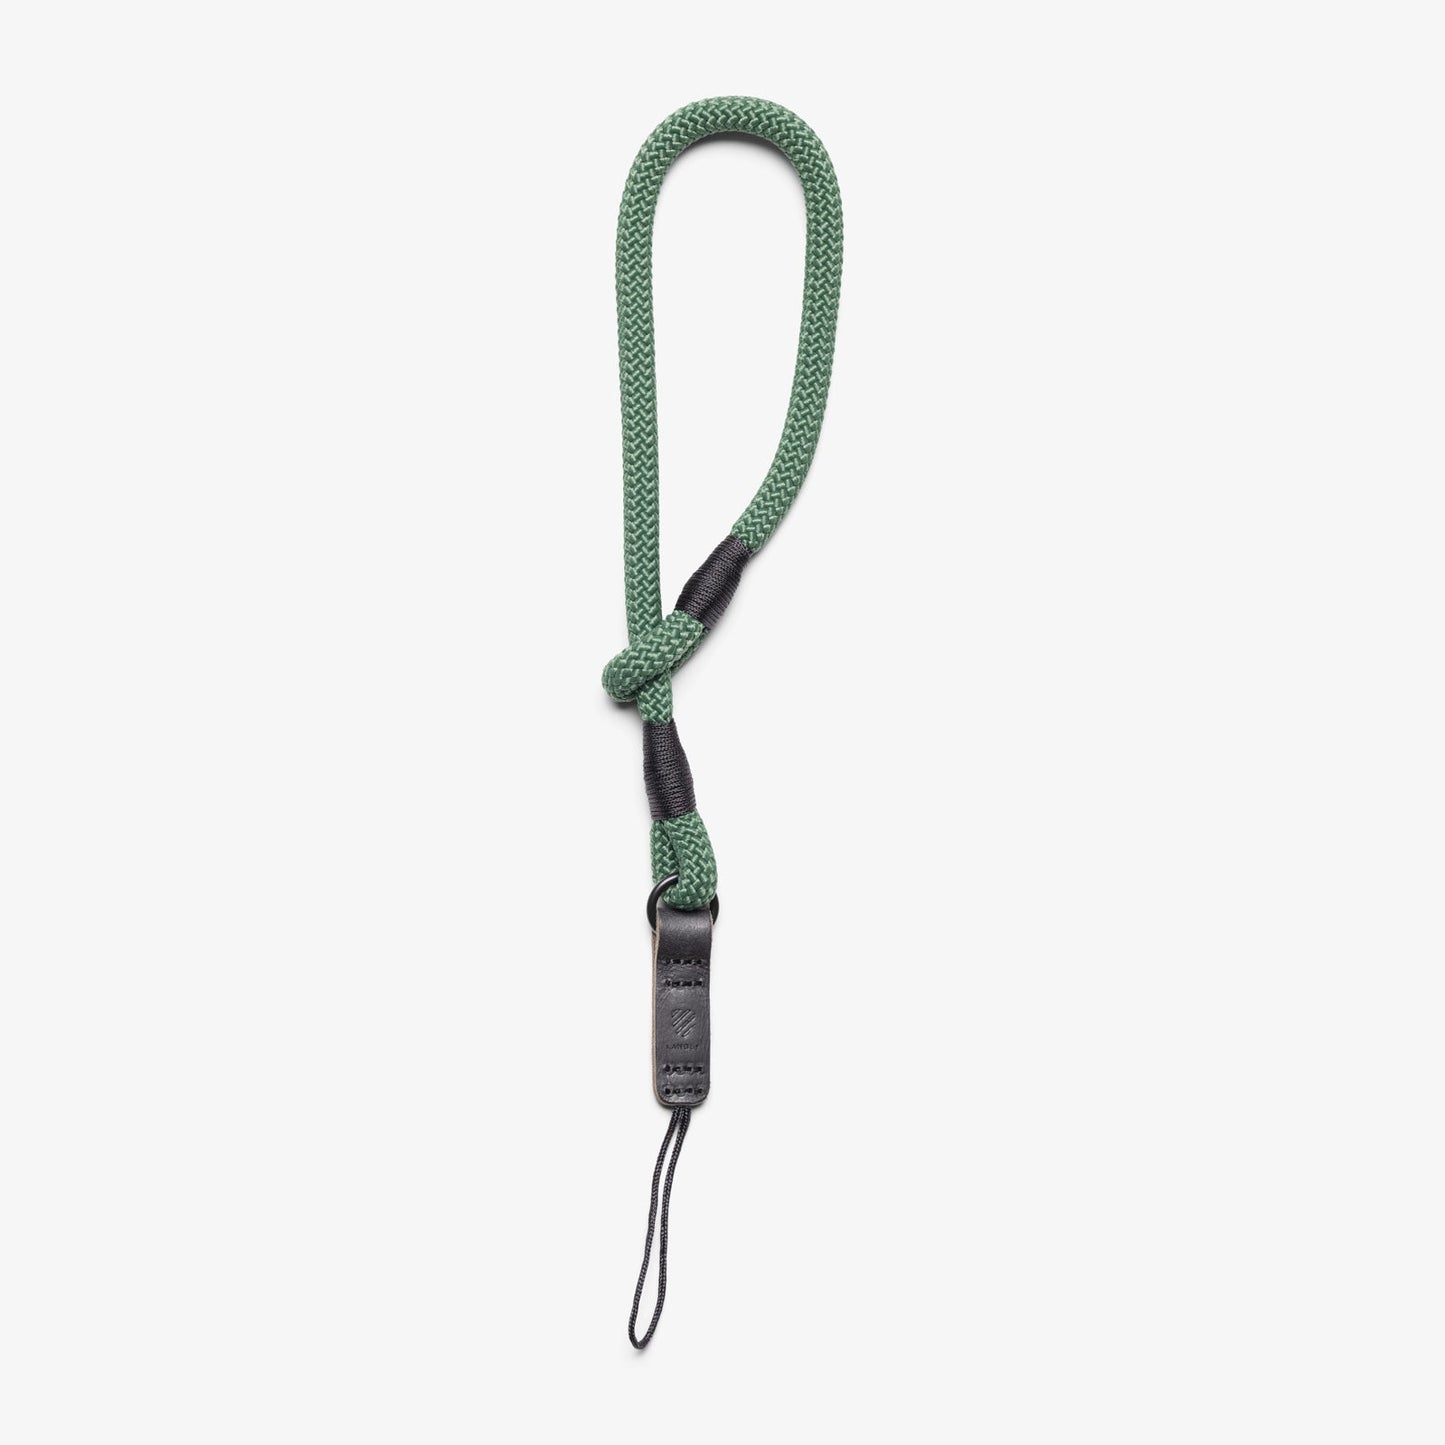 Langly Camera and Phone Wrist Strap